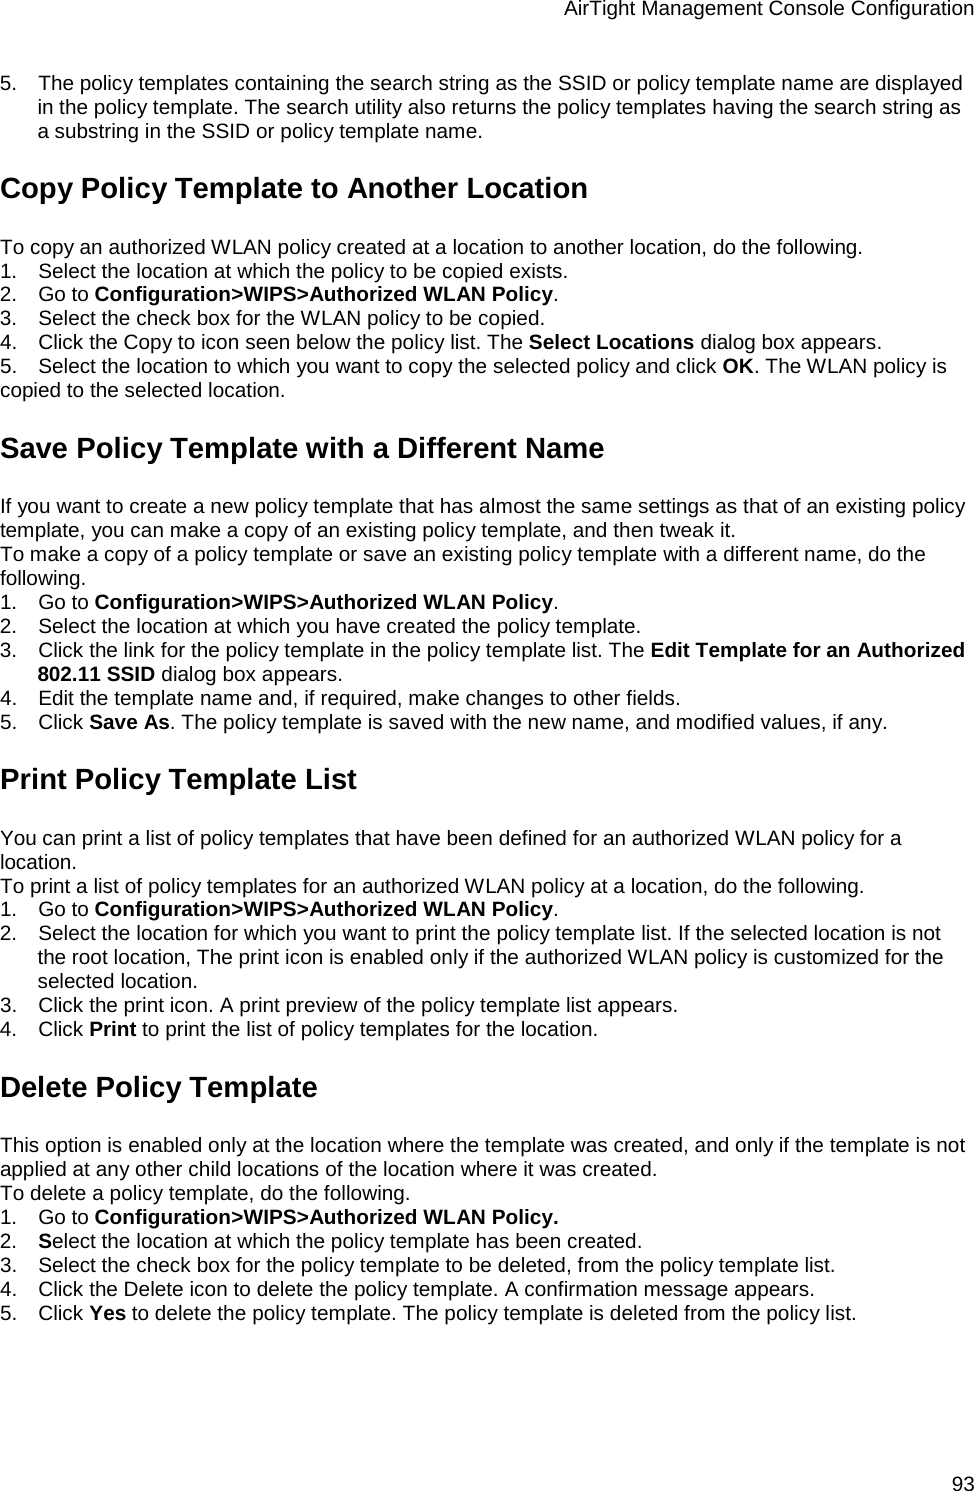 AirTight Management Console Configuration 93 5.      The policy templates containing the search string as the SSID or policy template name are displayed in the policy template. The search utility also returns the policy templates having the search string as a substring in the SSID or policy template name. Copy Policy Template to Another Location To copy an authorized WLAN policy created at a location to another location, do the following. 1.      Select the location at which the policy to be copied exists. 2.      Go to Configuration&gt;WIPS&gt;Authorized WLAN Policy. 3.      Select the check box for the WLAN policy to be copied. 4.      Click the Copy to icon seen below the policy list. The Select Locations dialog box appears. 5.      Select the location to which you want to copy the selected policy and click OK. The WLAN policy is copied to the selected location. Save Policy Template with a Different Name If you want to create a new policy template that has almost the same settings as that of an existing policy template, you can make a copy of an existing policy template, and then tweak it. To make a copy of a policy template or save an existing policy template with a different name, do the following. 1.      Go to Configuration&gt;WIPS&gt;Authorized WLAN Policy. 2.      Select the location at which you have created the policy template. 3.      Click the link for the policy template in the policy template list. The Edit Template for an Authorized 802.11 SSID dialog box appears. 4.      Edit the template name and, if required, make changes to other fields. 5.      Click Save As. The policy template is saved with the new name, and modified values, if any. Print Policy Template List You can print a list of policy templates that have been defined for an authorized WLAN policy for a location. To print a list of policy templates for an authorized WLAN policy at a location, do the following. 1.      Go to Configuration&gt;WIPS&gt;Authorized WLAN Policy.  2.      Select the location for which you want to print the policy template list. If the selected location is not the root location, The print icon is enabled only if the authorized WLAN policy is customized for the selected location. 3.      Click the print icon. A print preview of the policy template list appears. 4.      Click Print to print the list of policy templates for the location. Delete Policy Template This option is enabled only at the location where the template was created, and only if the template is not applied at any other child locations of the location where it was created. To delete a policy template, do the following. 1.      Go to Configuration&gt;WIPS&gt;Authorized WLAN Policy. 2.      Select the location at which the policy template has been created. 3.      Select the check box for the policy template to be deleted, from the policy template list. 4.      Click the Delete icon to delete the policy template. A confirmation message appears. 5.      Click Yes to delete the policy template. The policy template is deleted from the policy list.   